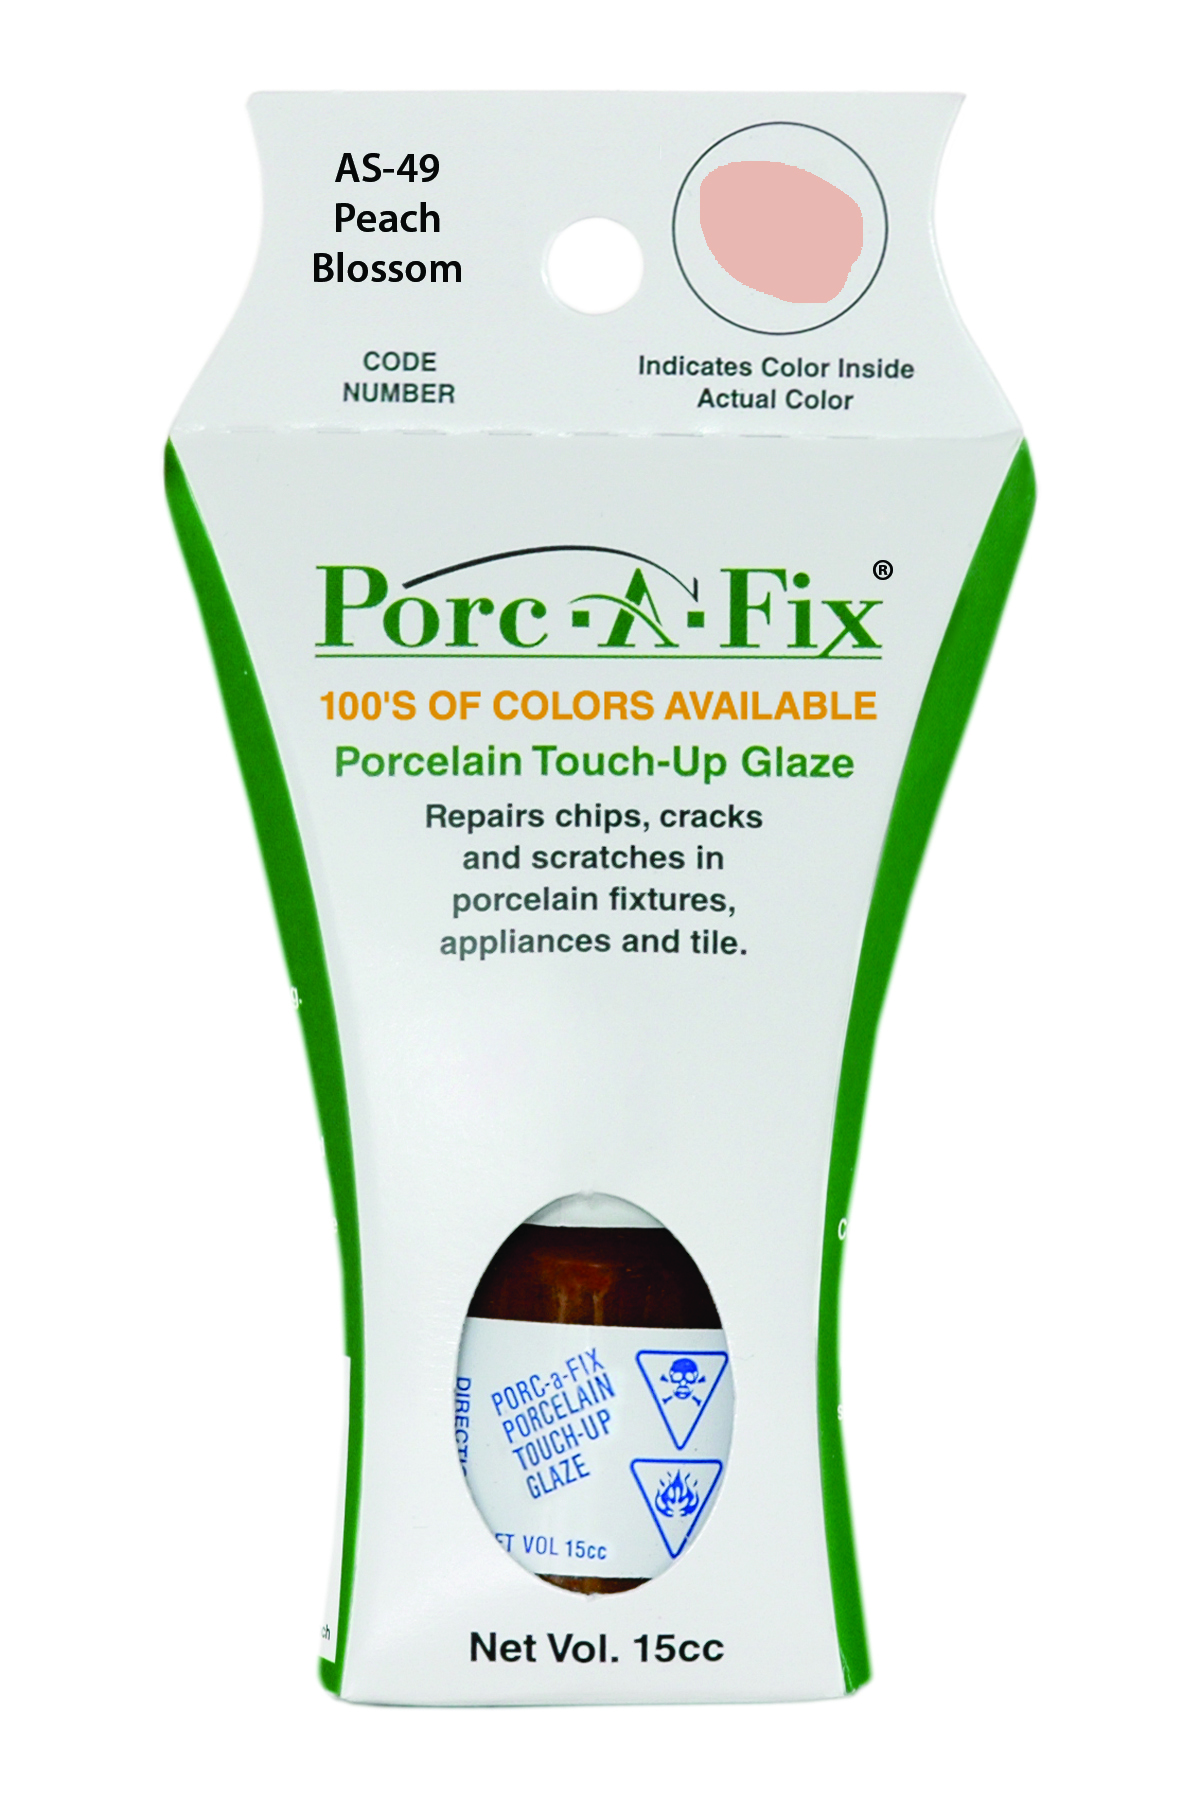 Fixture-Fix | AS-49 | Porc-A-Fix Touch-Up Glaze American Standard Peach Blossom - Compatible with American Standard 070900-2010A Touch Up Paint Kit - PEACH BLOSSOM